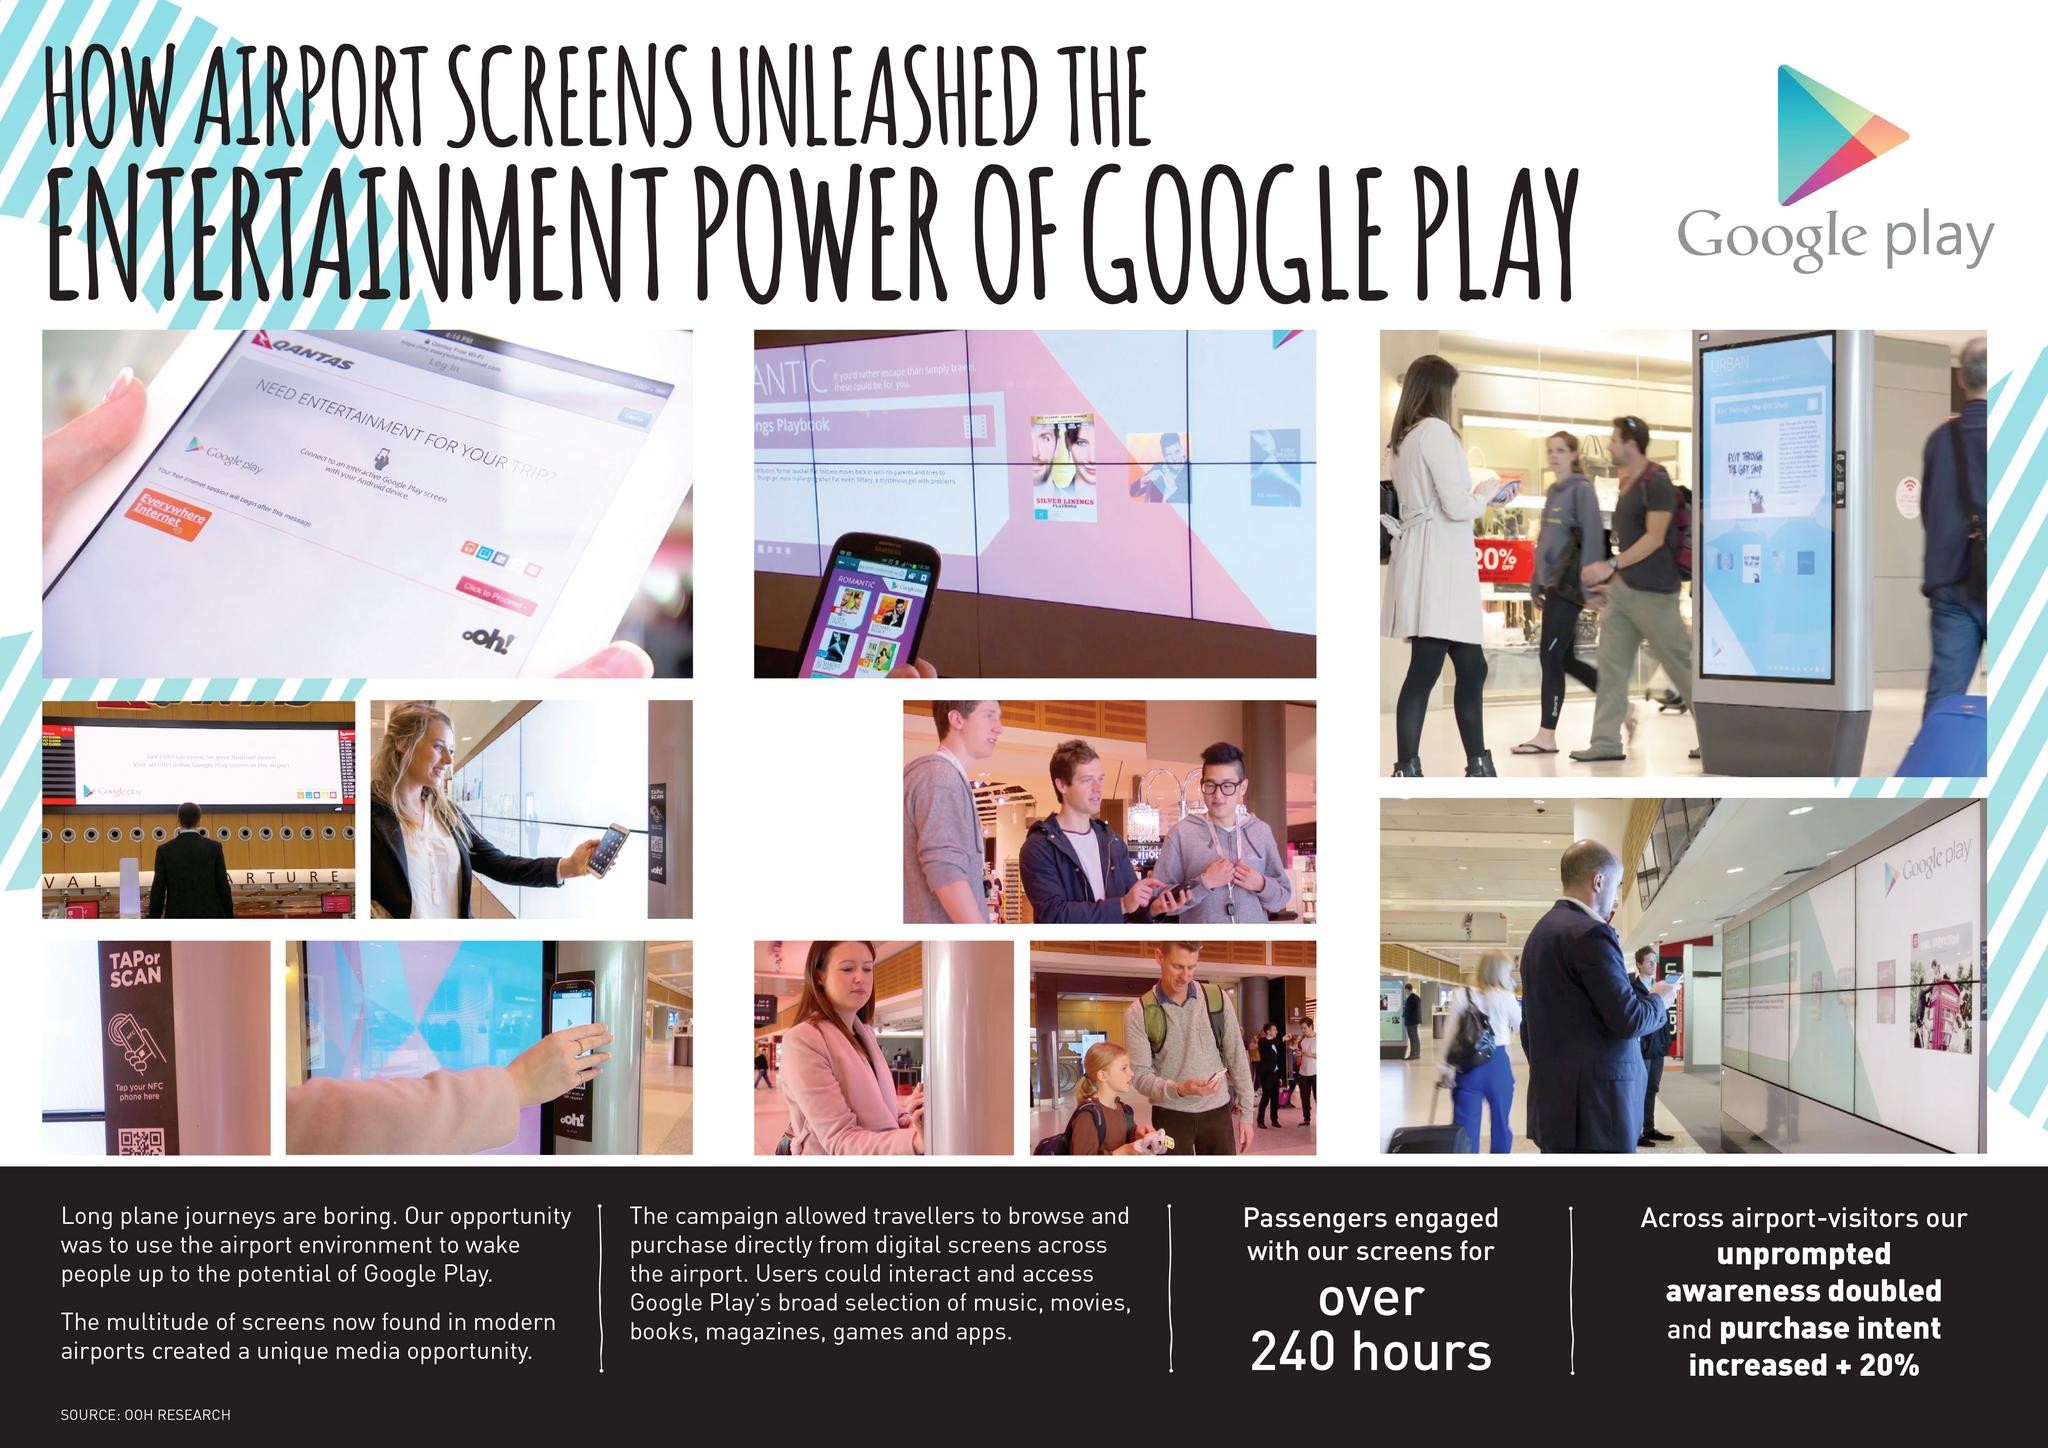 HOW AIRPORT SCREENS UNLEASHED THE ENTERTAINMENT POWER OF GOOGLE PLAY